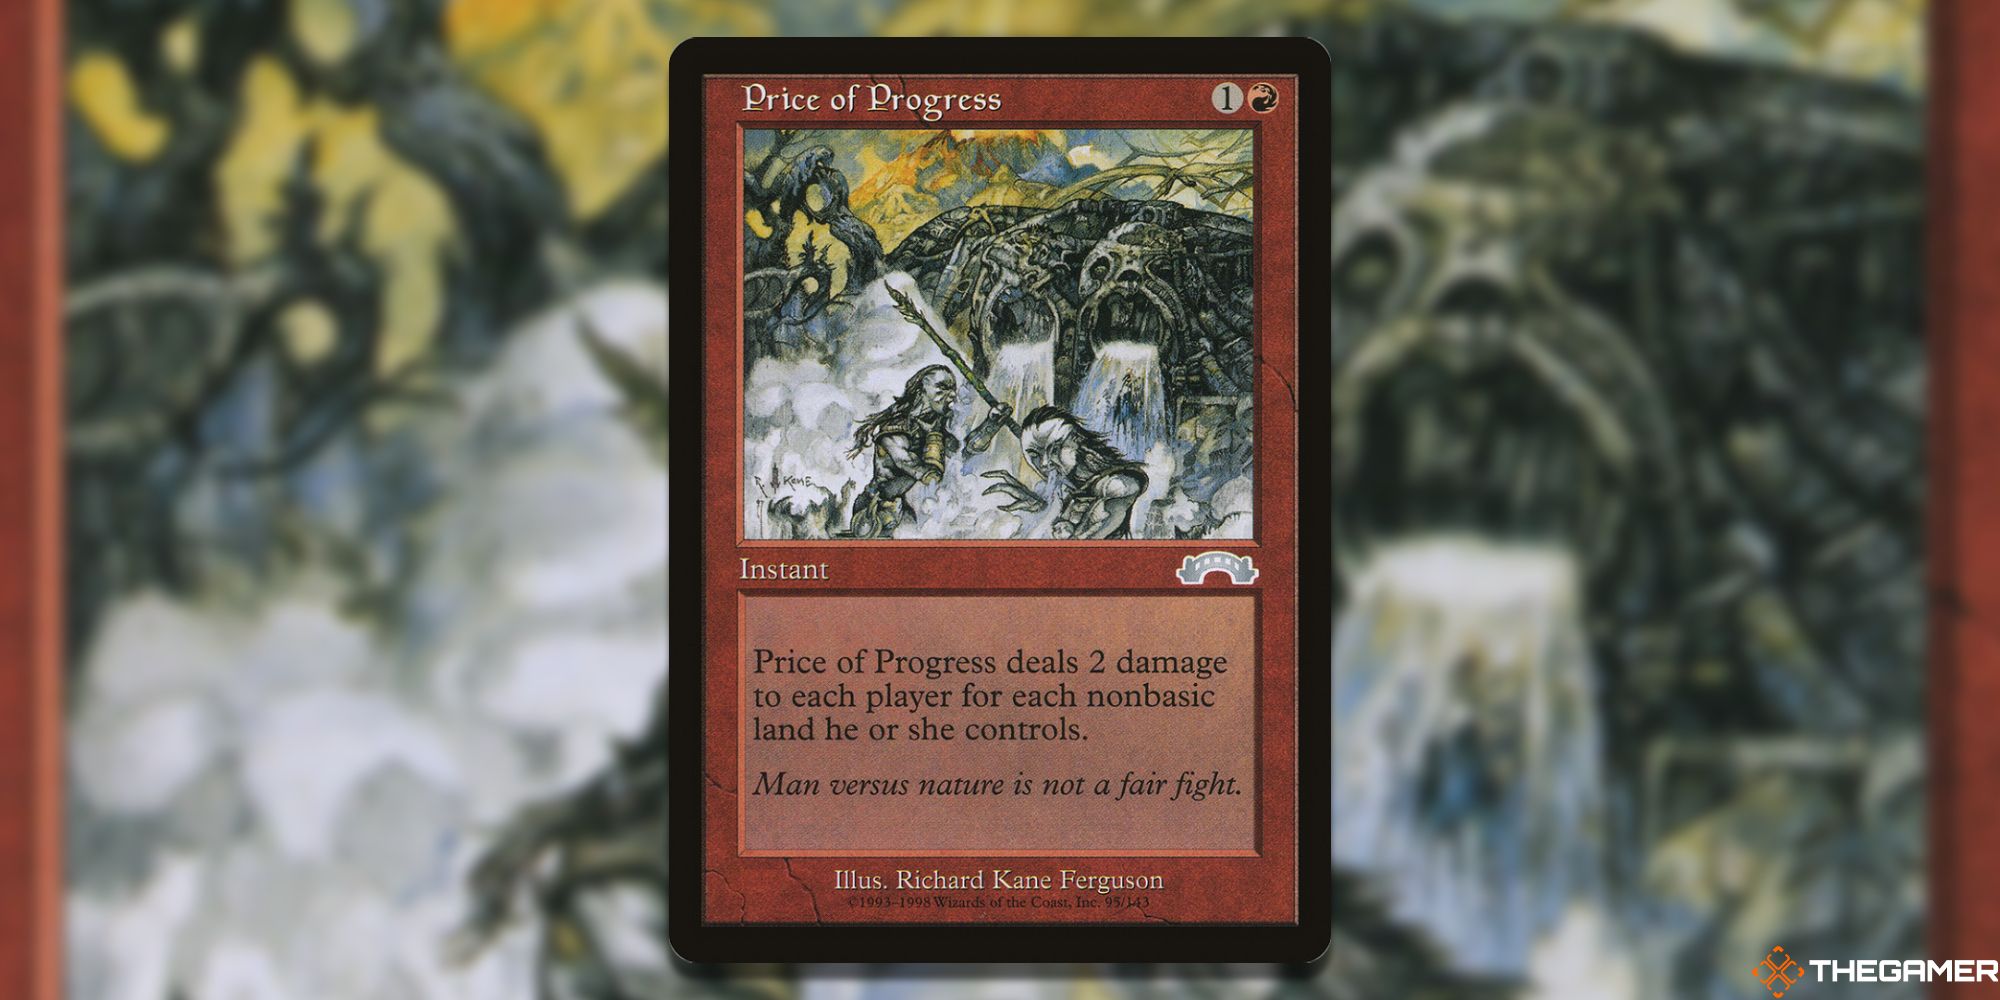 Image of the Price of Progress card in Magic: The Gathering, with art by Richard Kane Ferguson